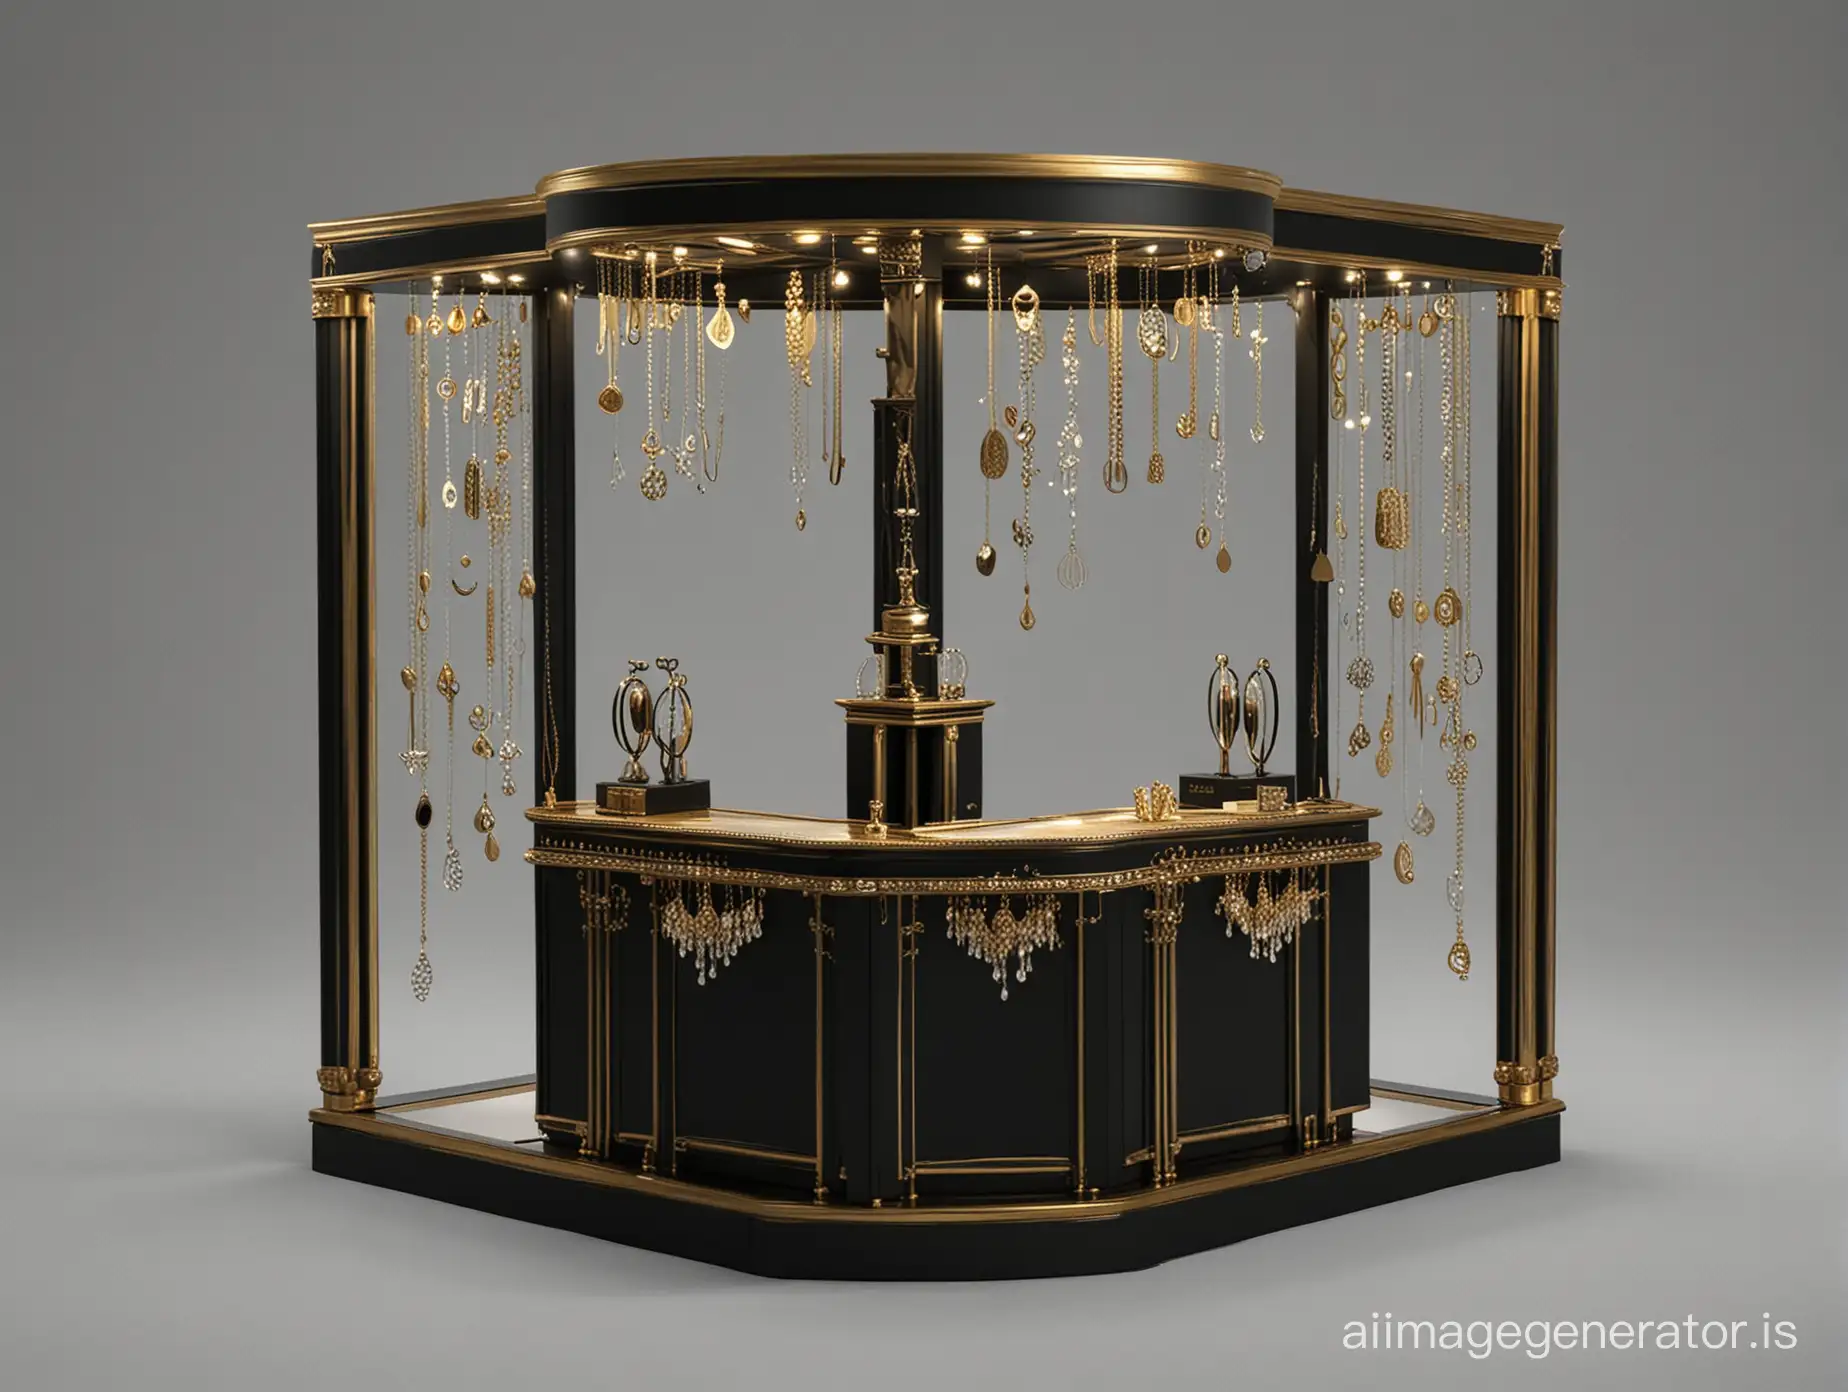 Elegant-Jewelry-Exhibition-Stand-in-Black-and-Gold-with-Sellers-and-Buyers